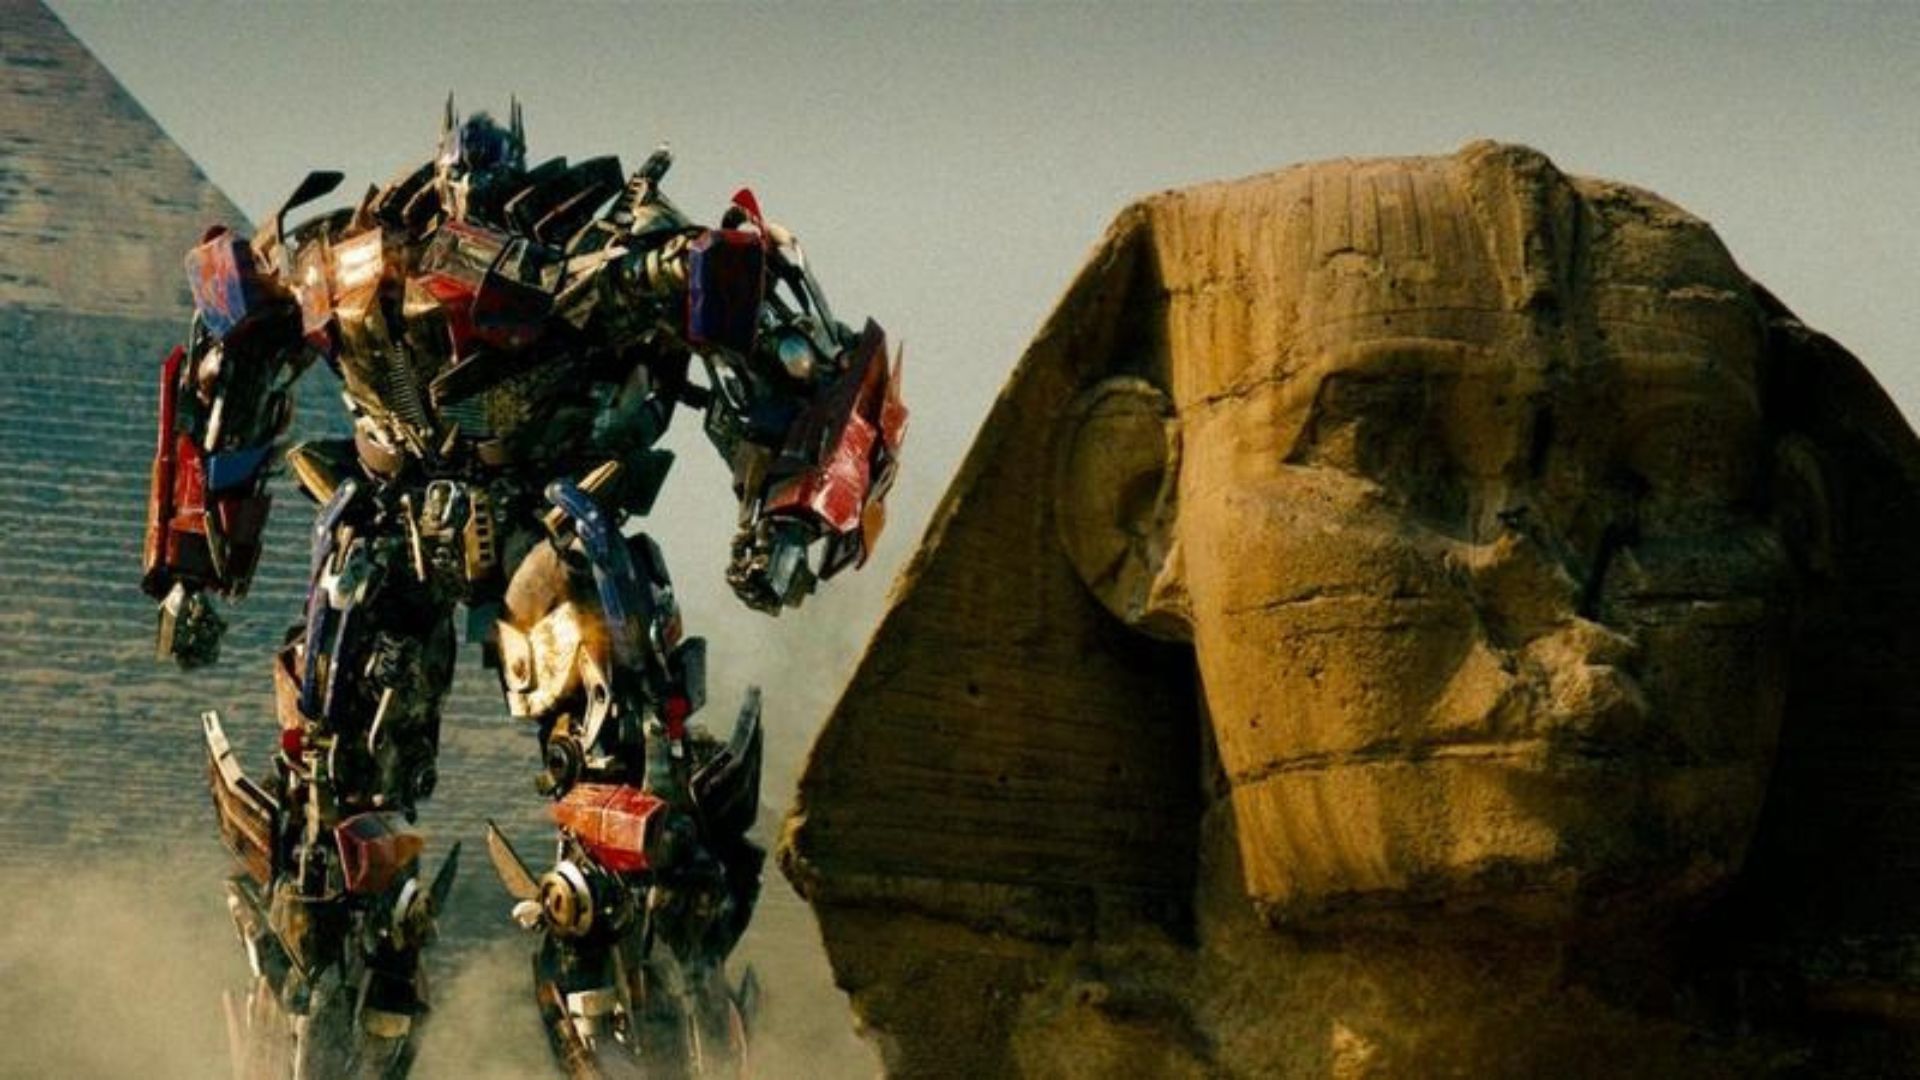 Where to watch all the Transformers movies and TV shows